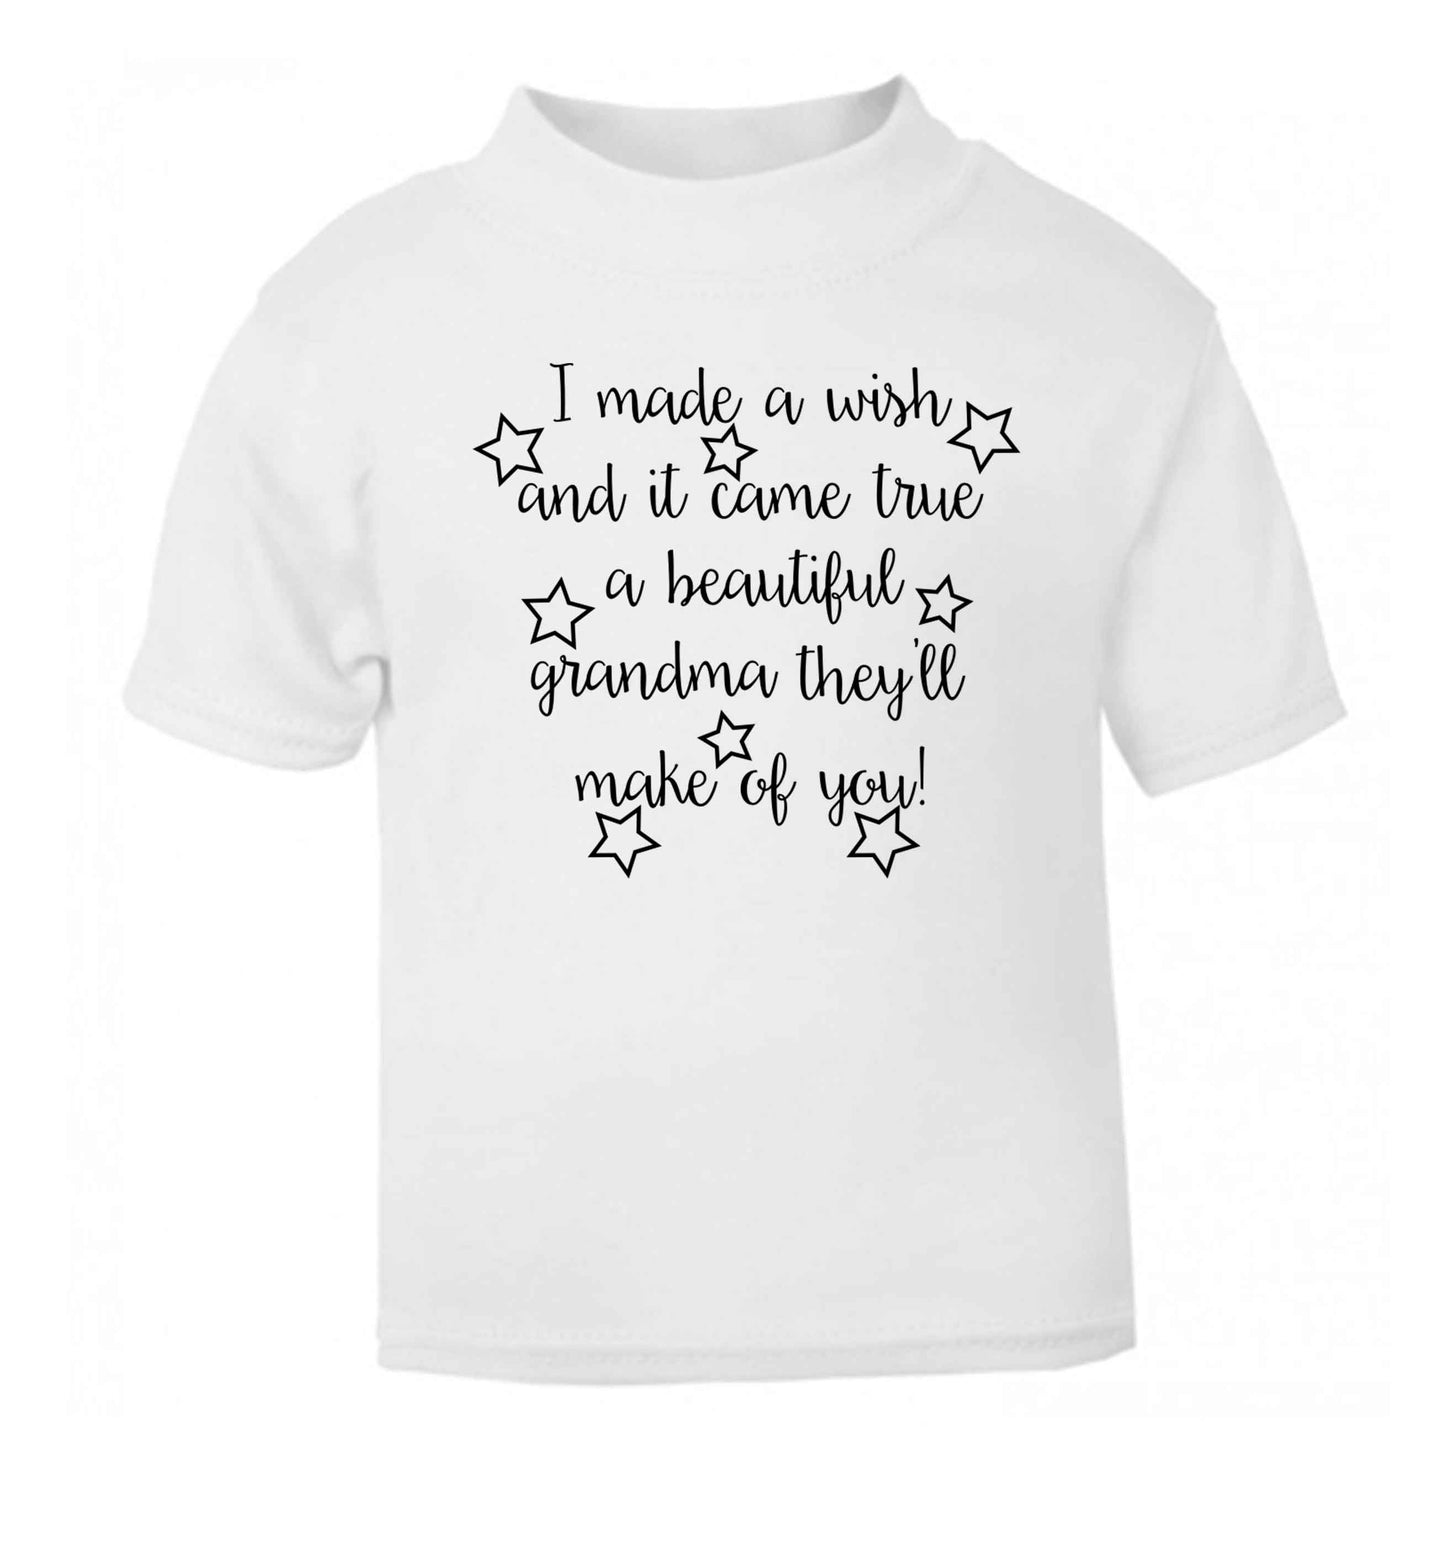 I made a wish and it came true a beautiful grandma they'll make of you! white Baby Toddler Tshirt 2 Years